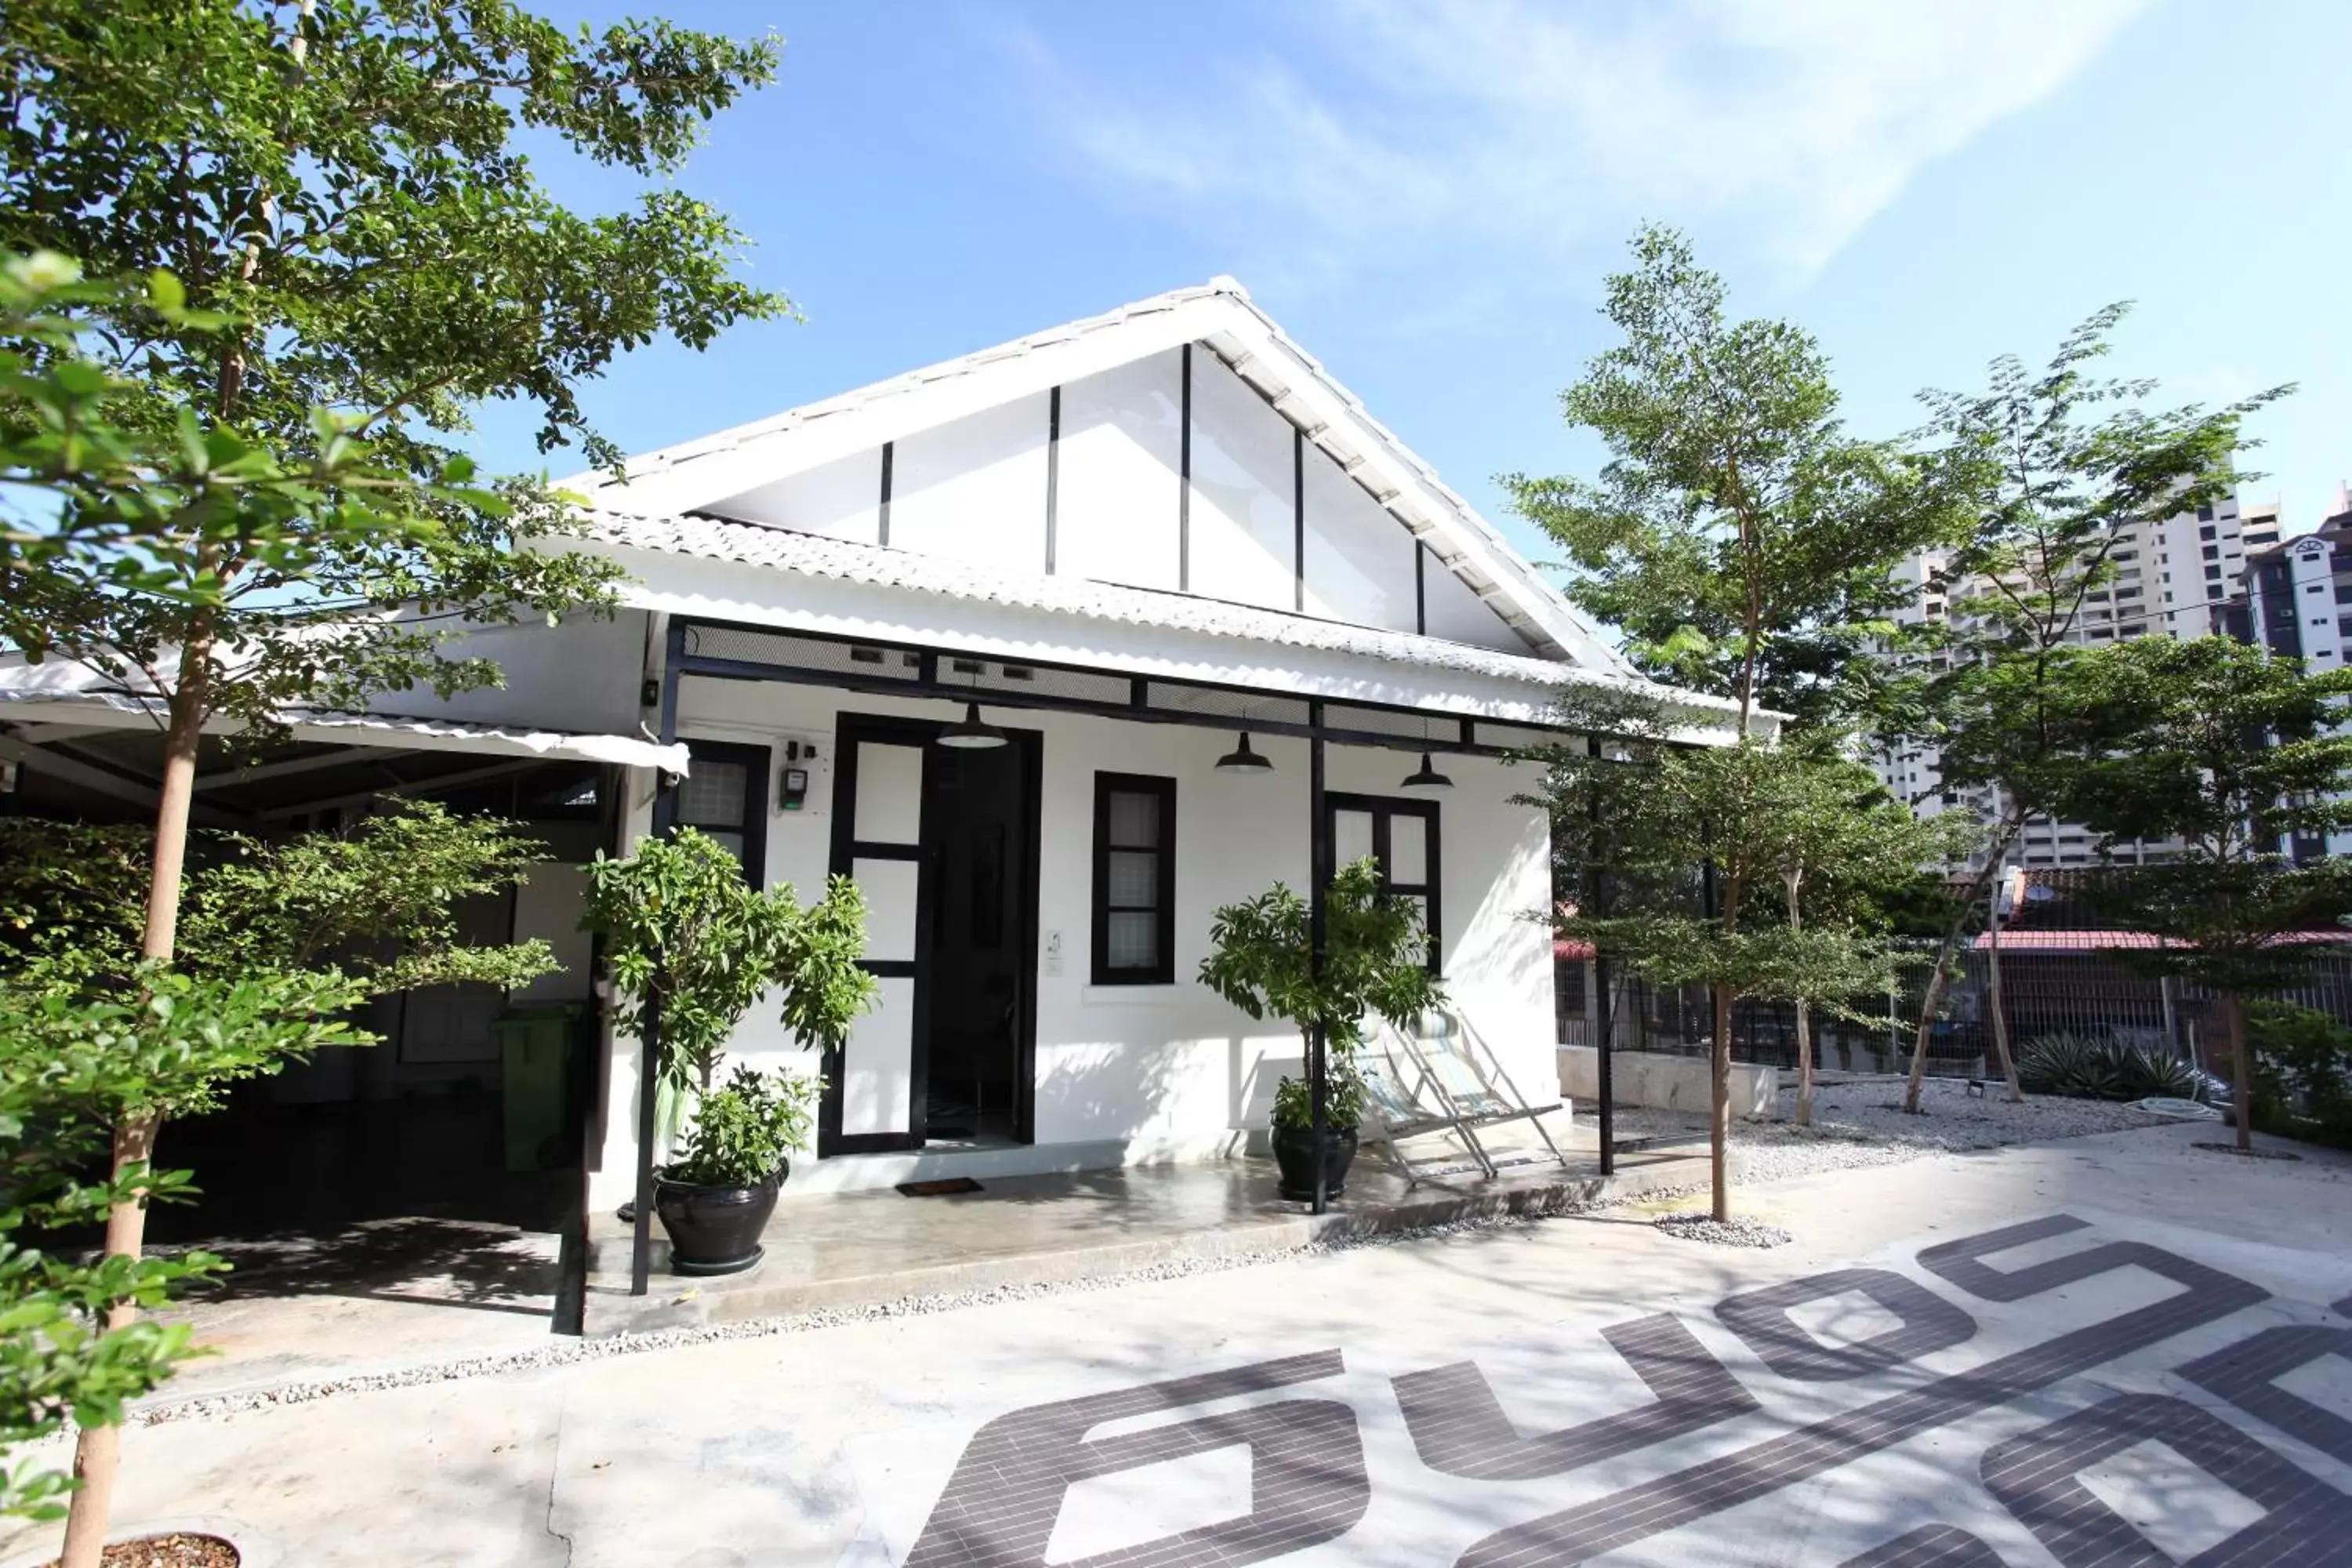 Property building, Patio/Outdoor Area in Stay SongSong Mount Erskine